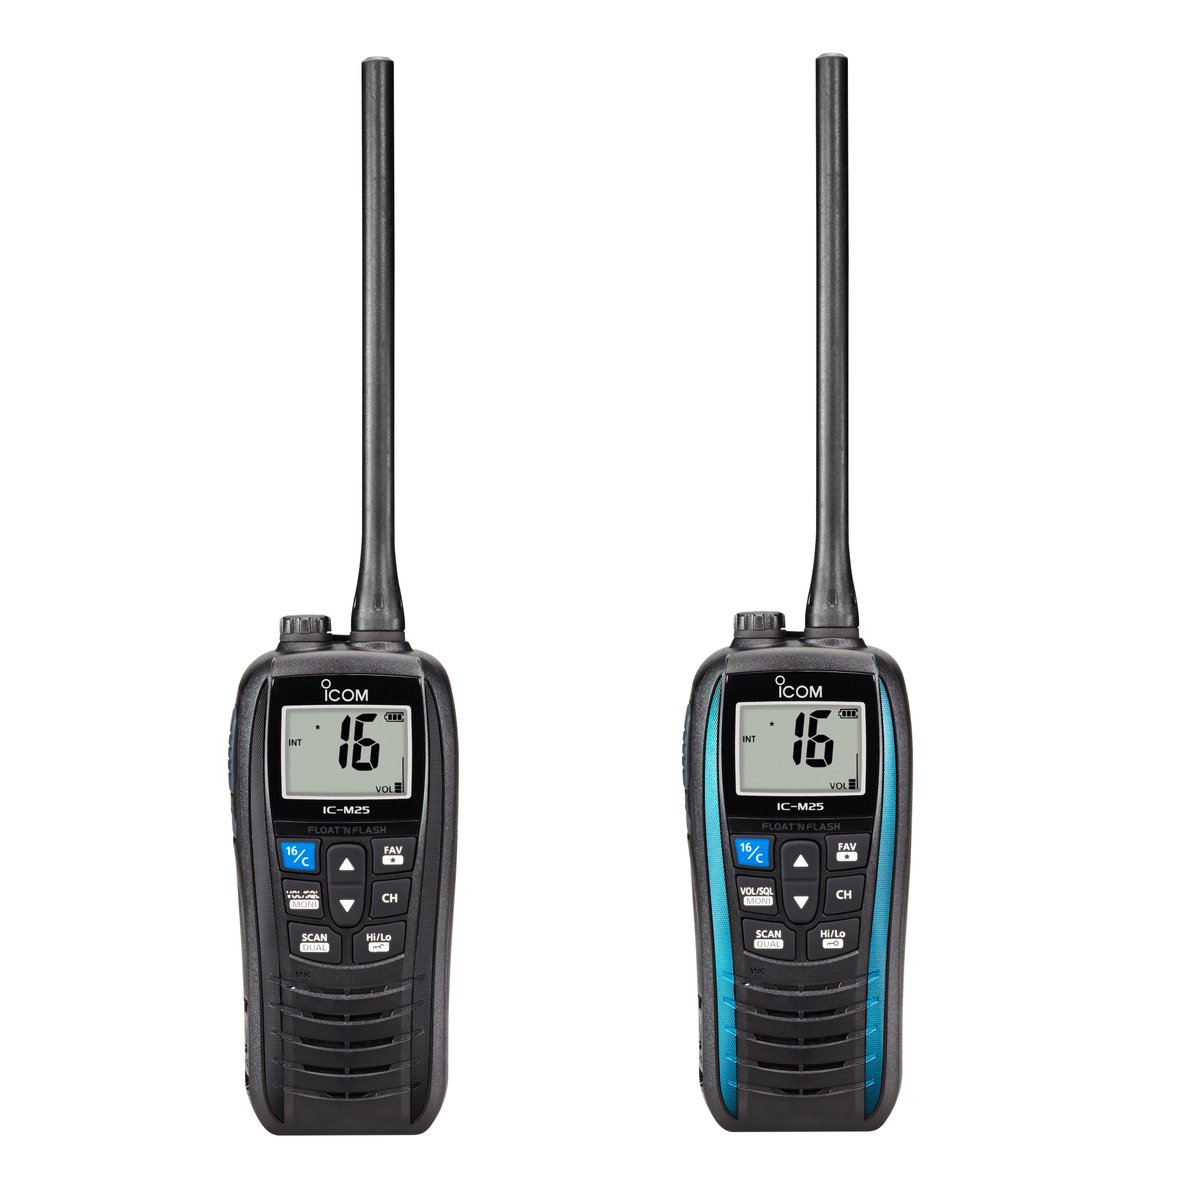 Our best-selling marine VHF, the IC-M25, has had a makeover and now comes in a very smart solid black...as well as our popular blue version. More details here: icomuk.co.uk/New-Look-to-Be… #icom #marine #VHF #boating #sailing